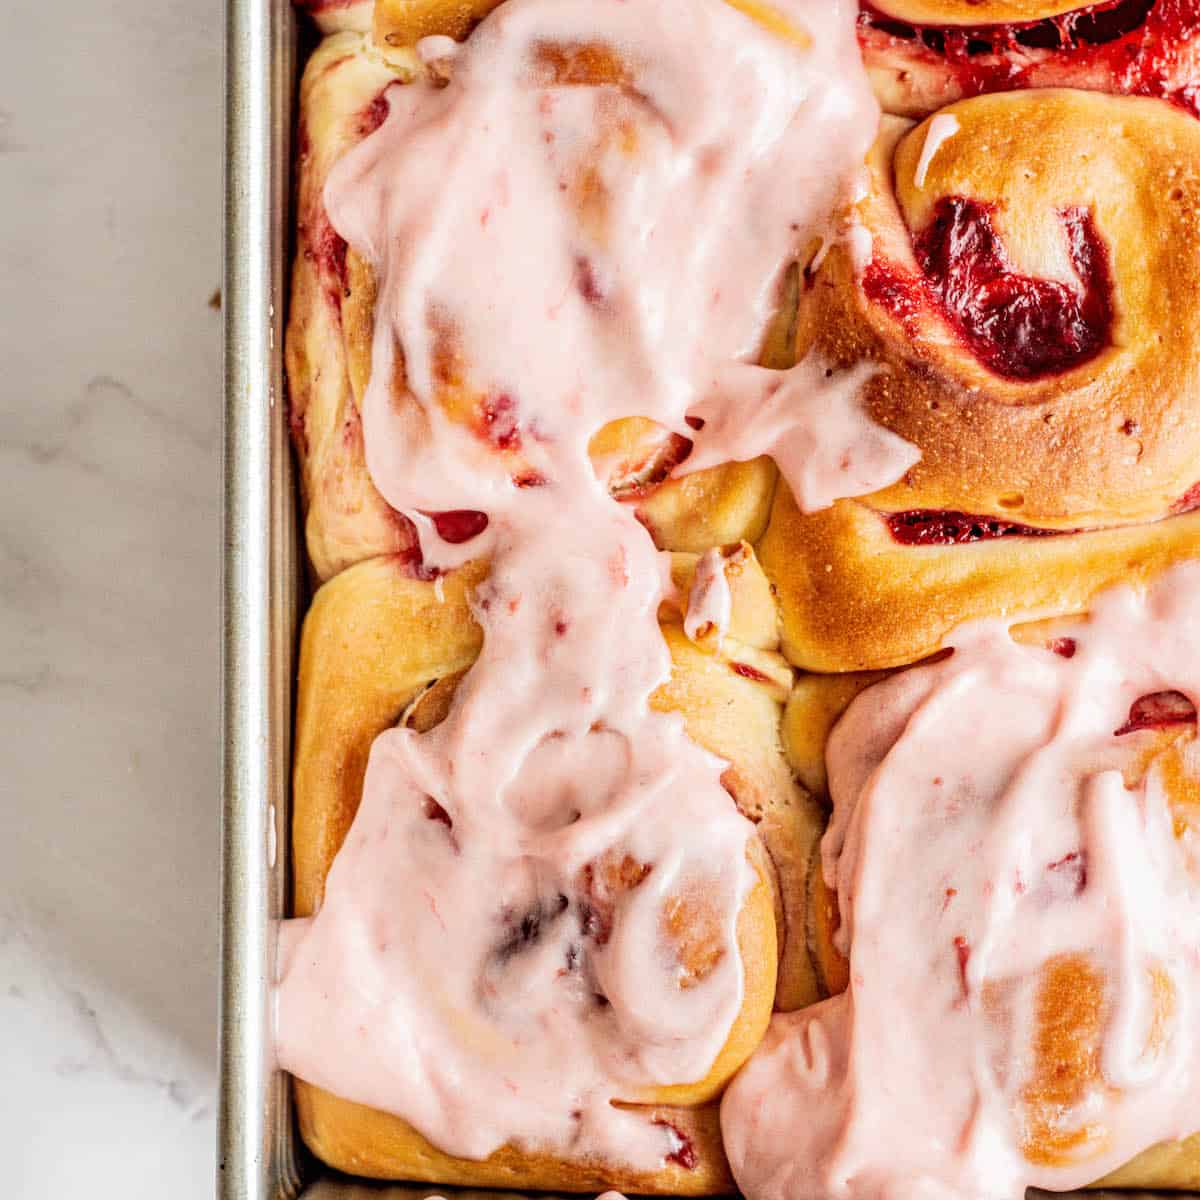 Top-down picture of strawberry cinnamon rolls with cream cheese icing spread over in a baking pan.